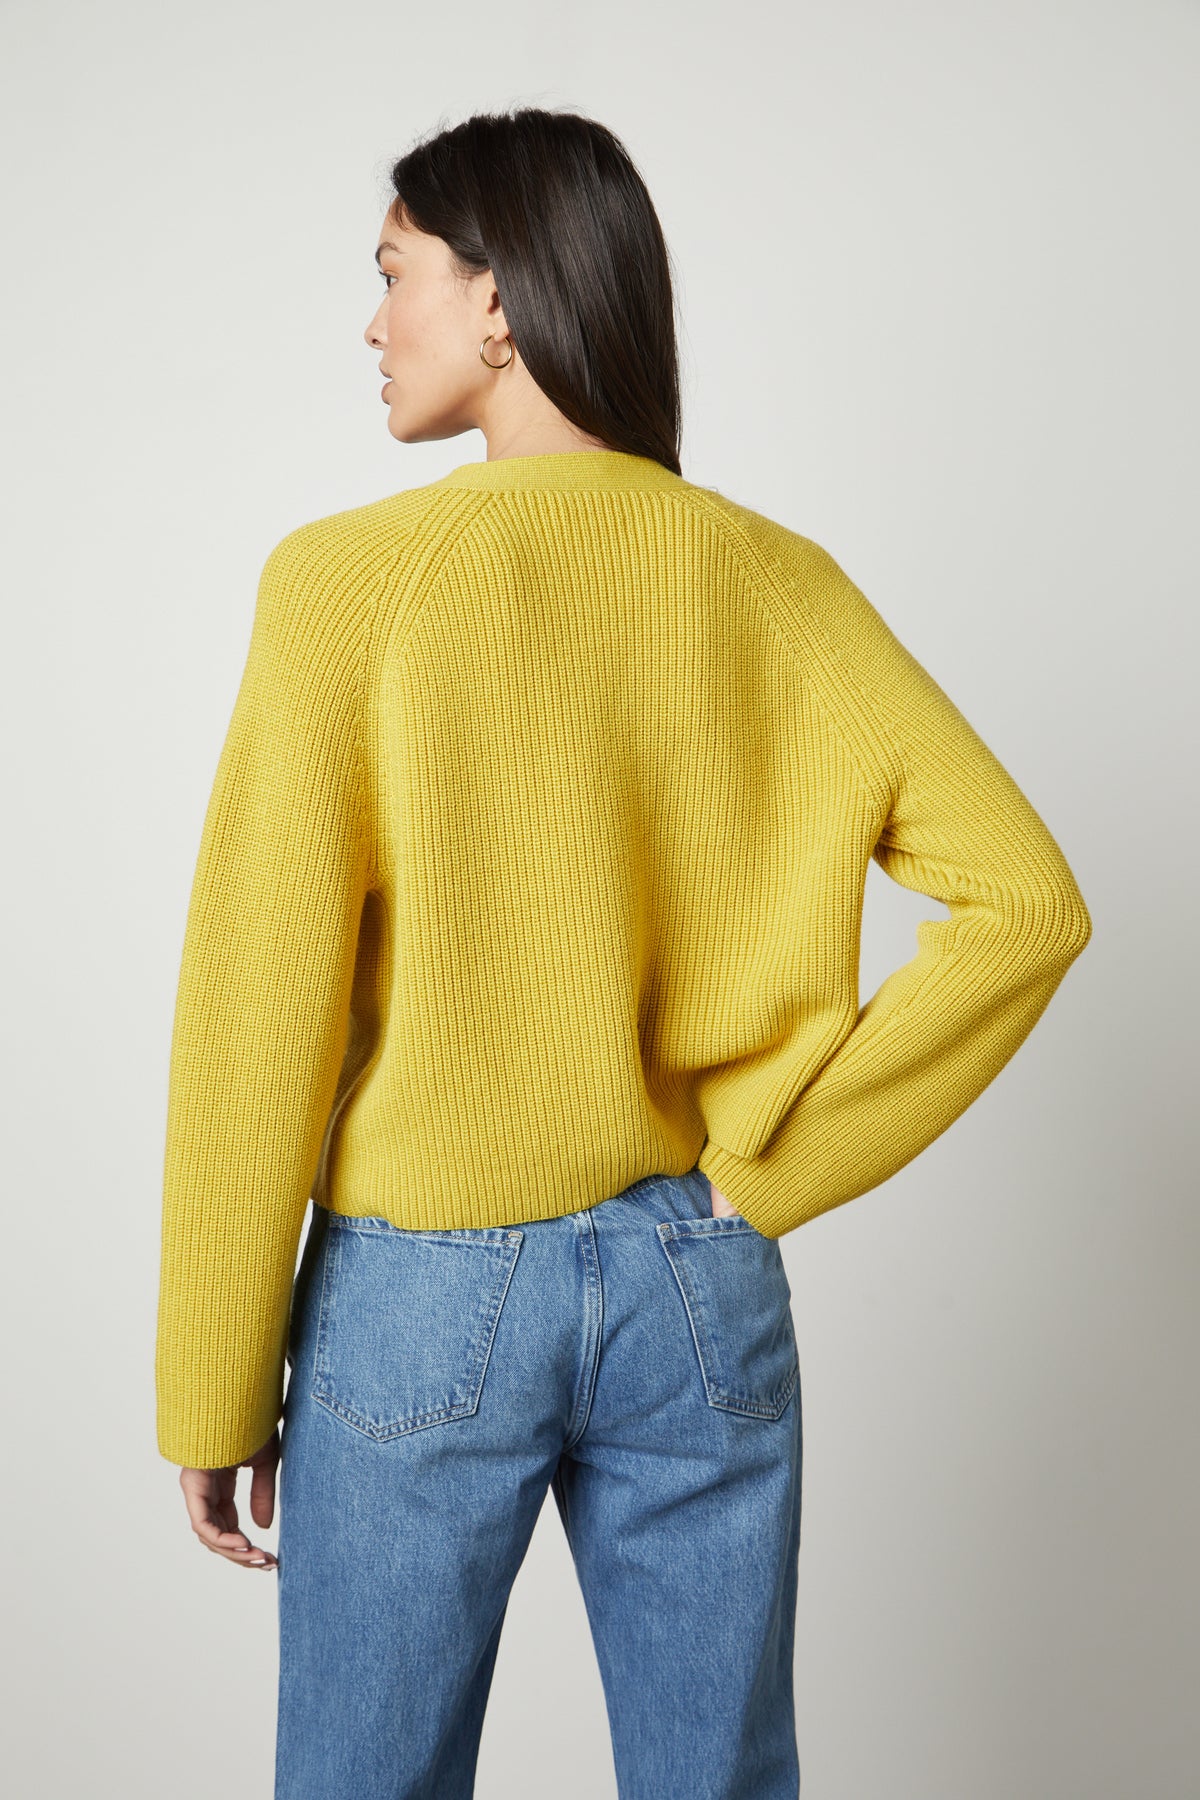 The back view of a woman wearing a Velvet by Graham & Spencer MARILYN BUTTON FRONT CARDIGAN  in sunflower yellow and jeans.-26727746994369